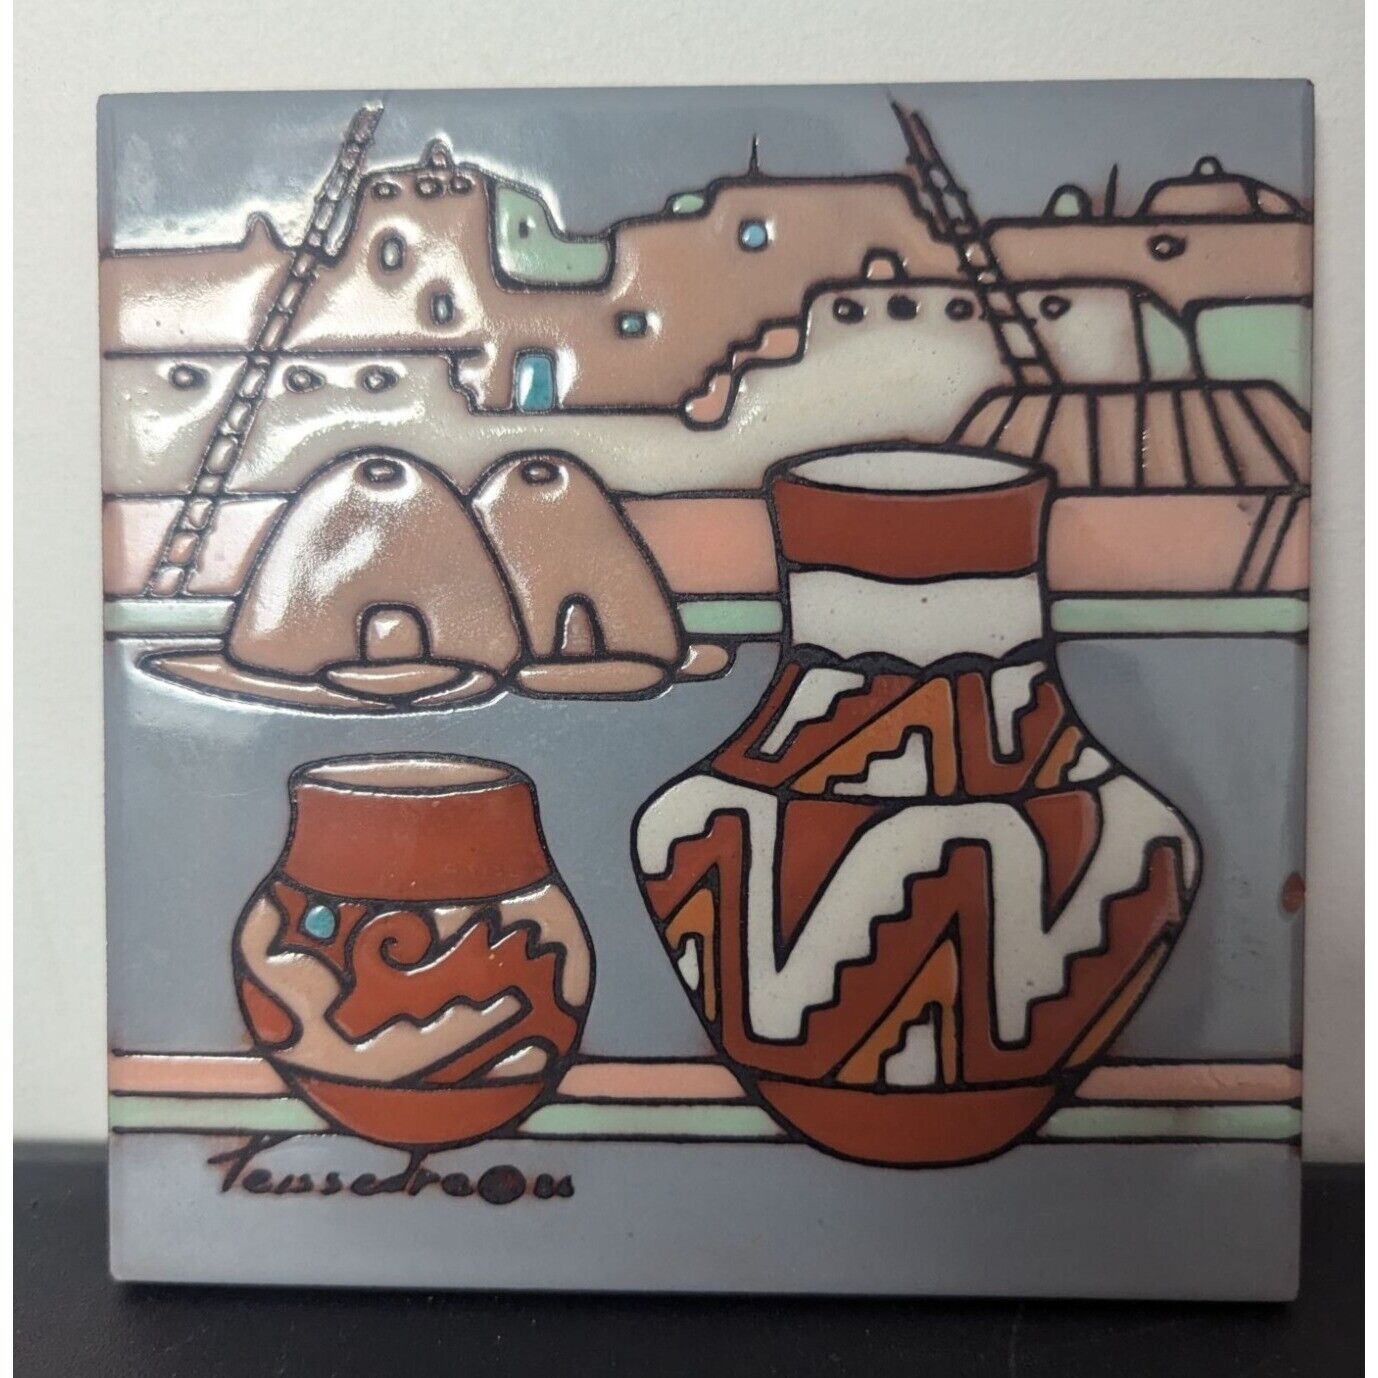 Cleo Teissedre Hand-Painted Southwestern Ceramic Tile Trivet 6in X 6in